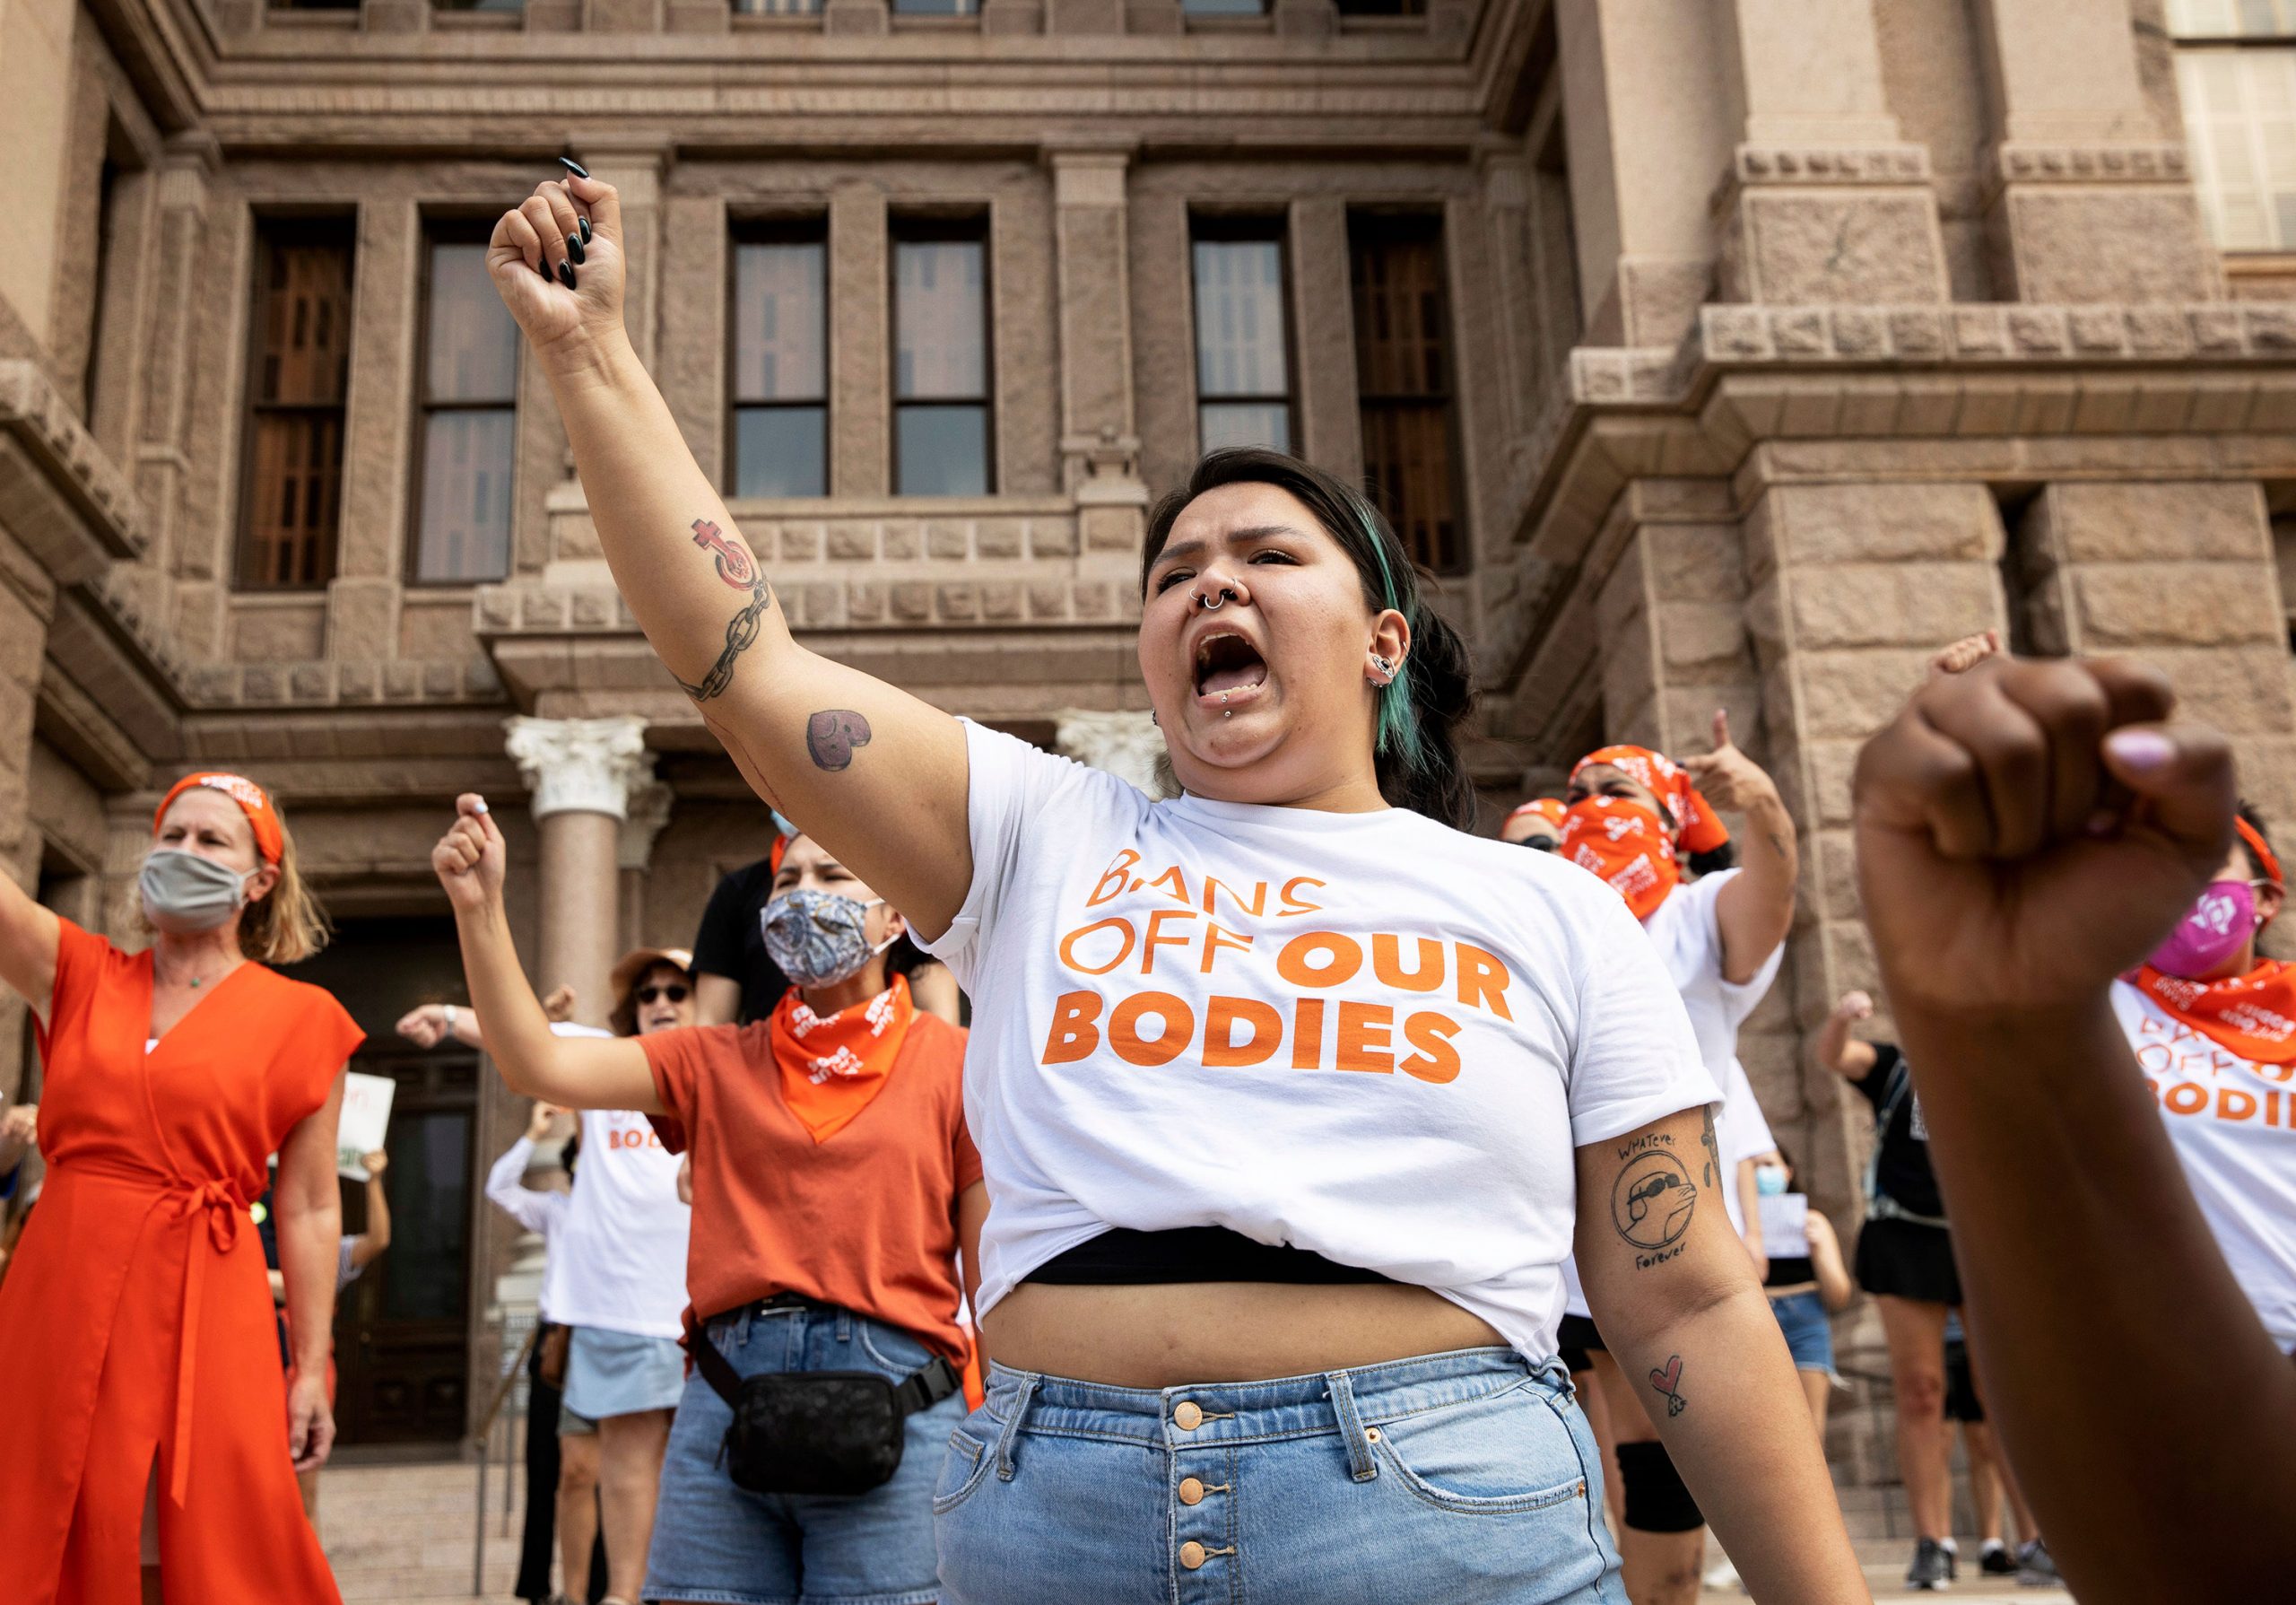 US Department of Justice asks Texas court to halt enforcement of abortion law